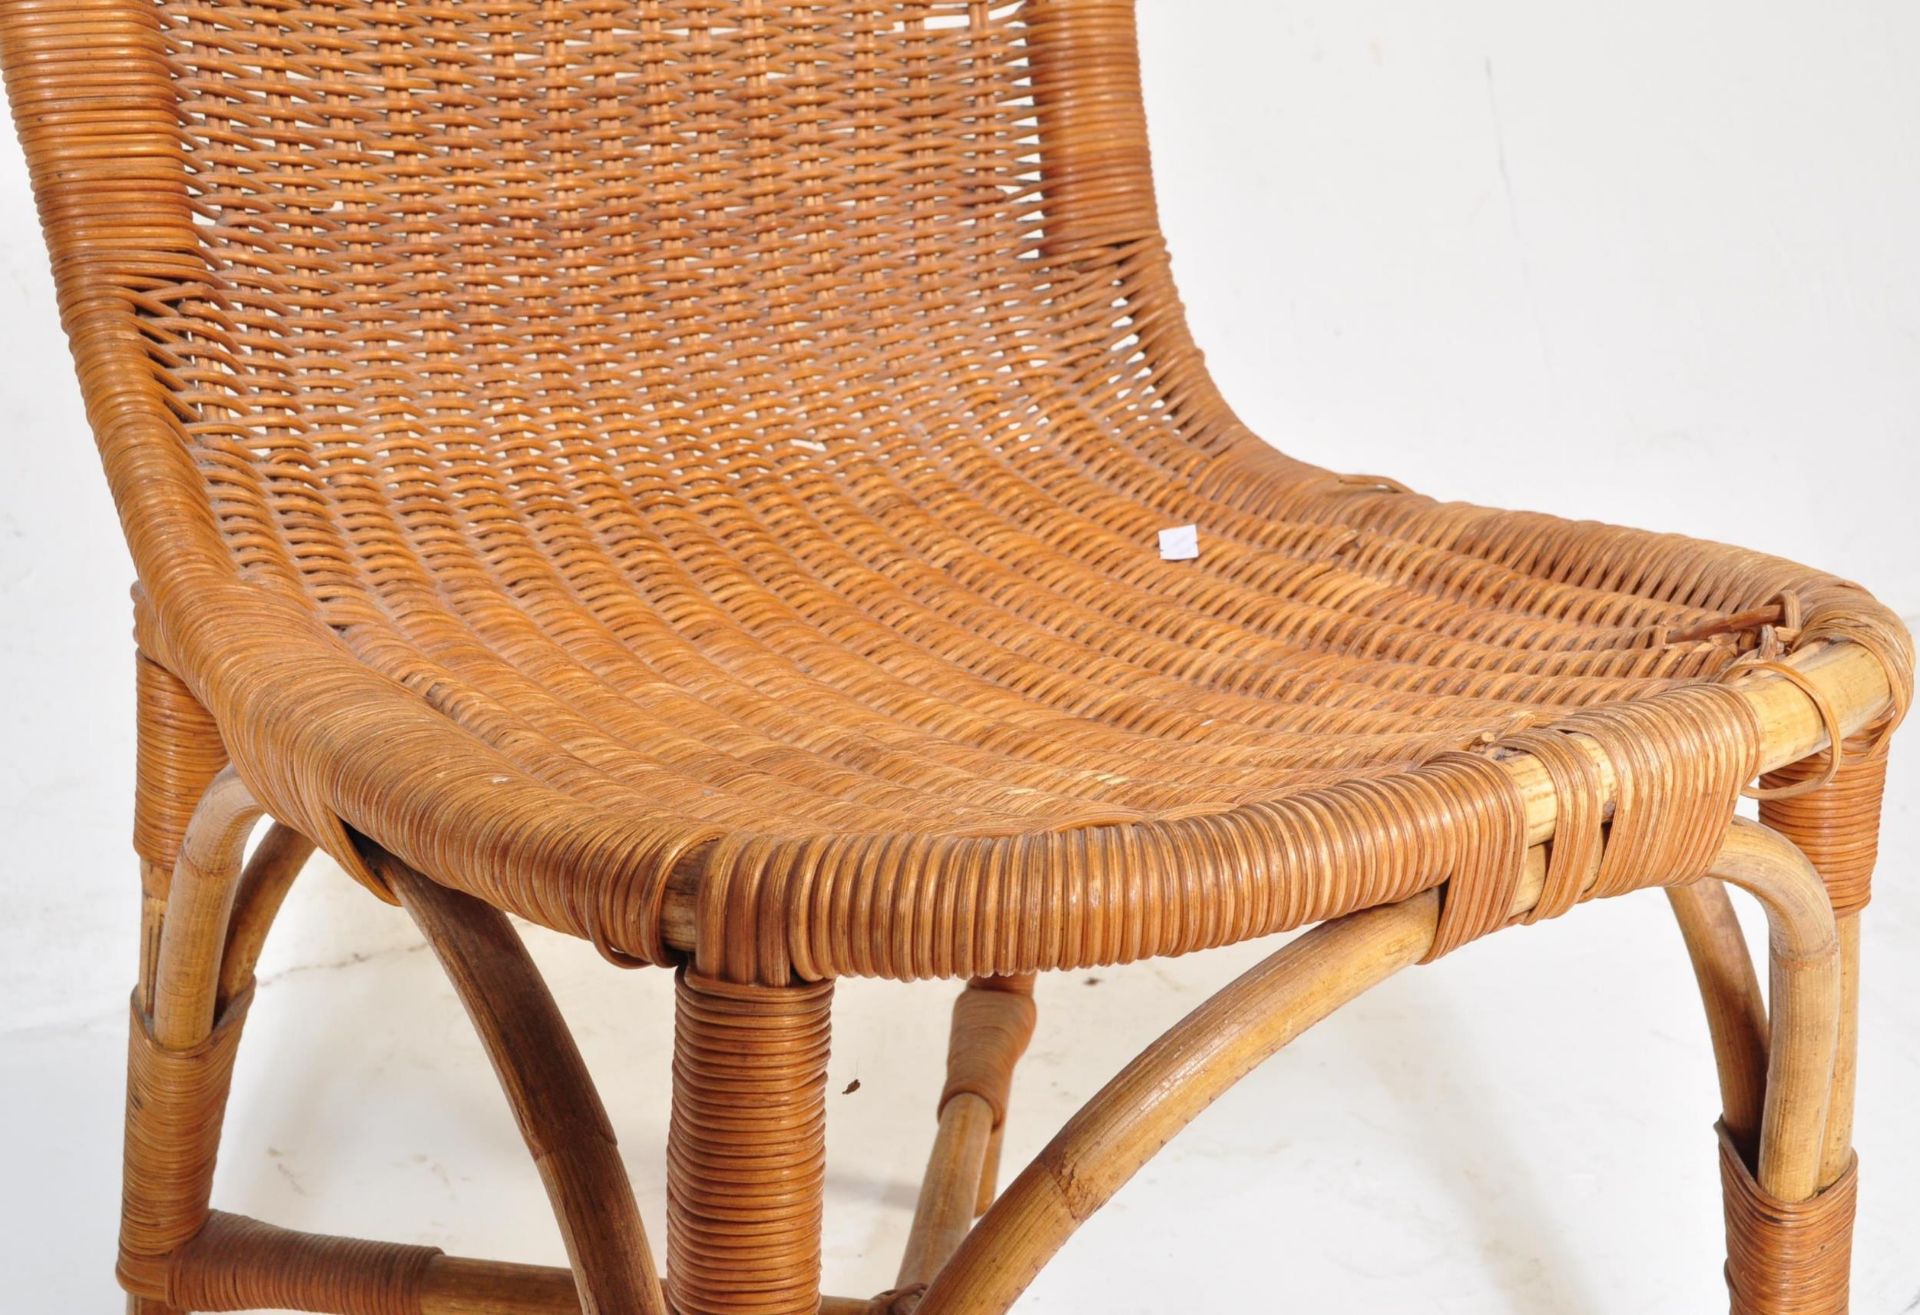 RETRO MID 20TH CENTURY WICKER CONSERVATORY CHAIR - Image 5 of 5